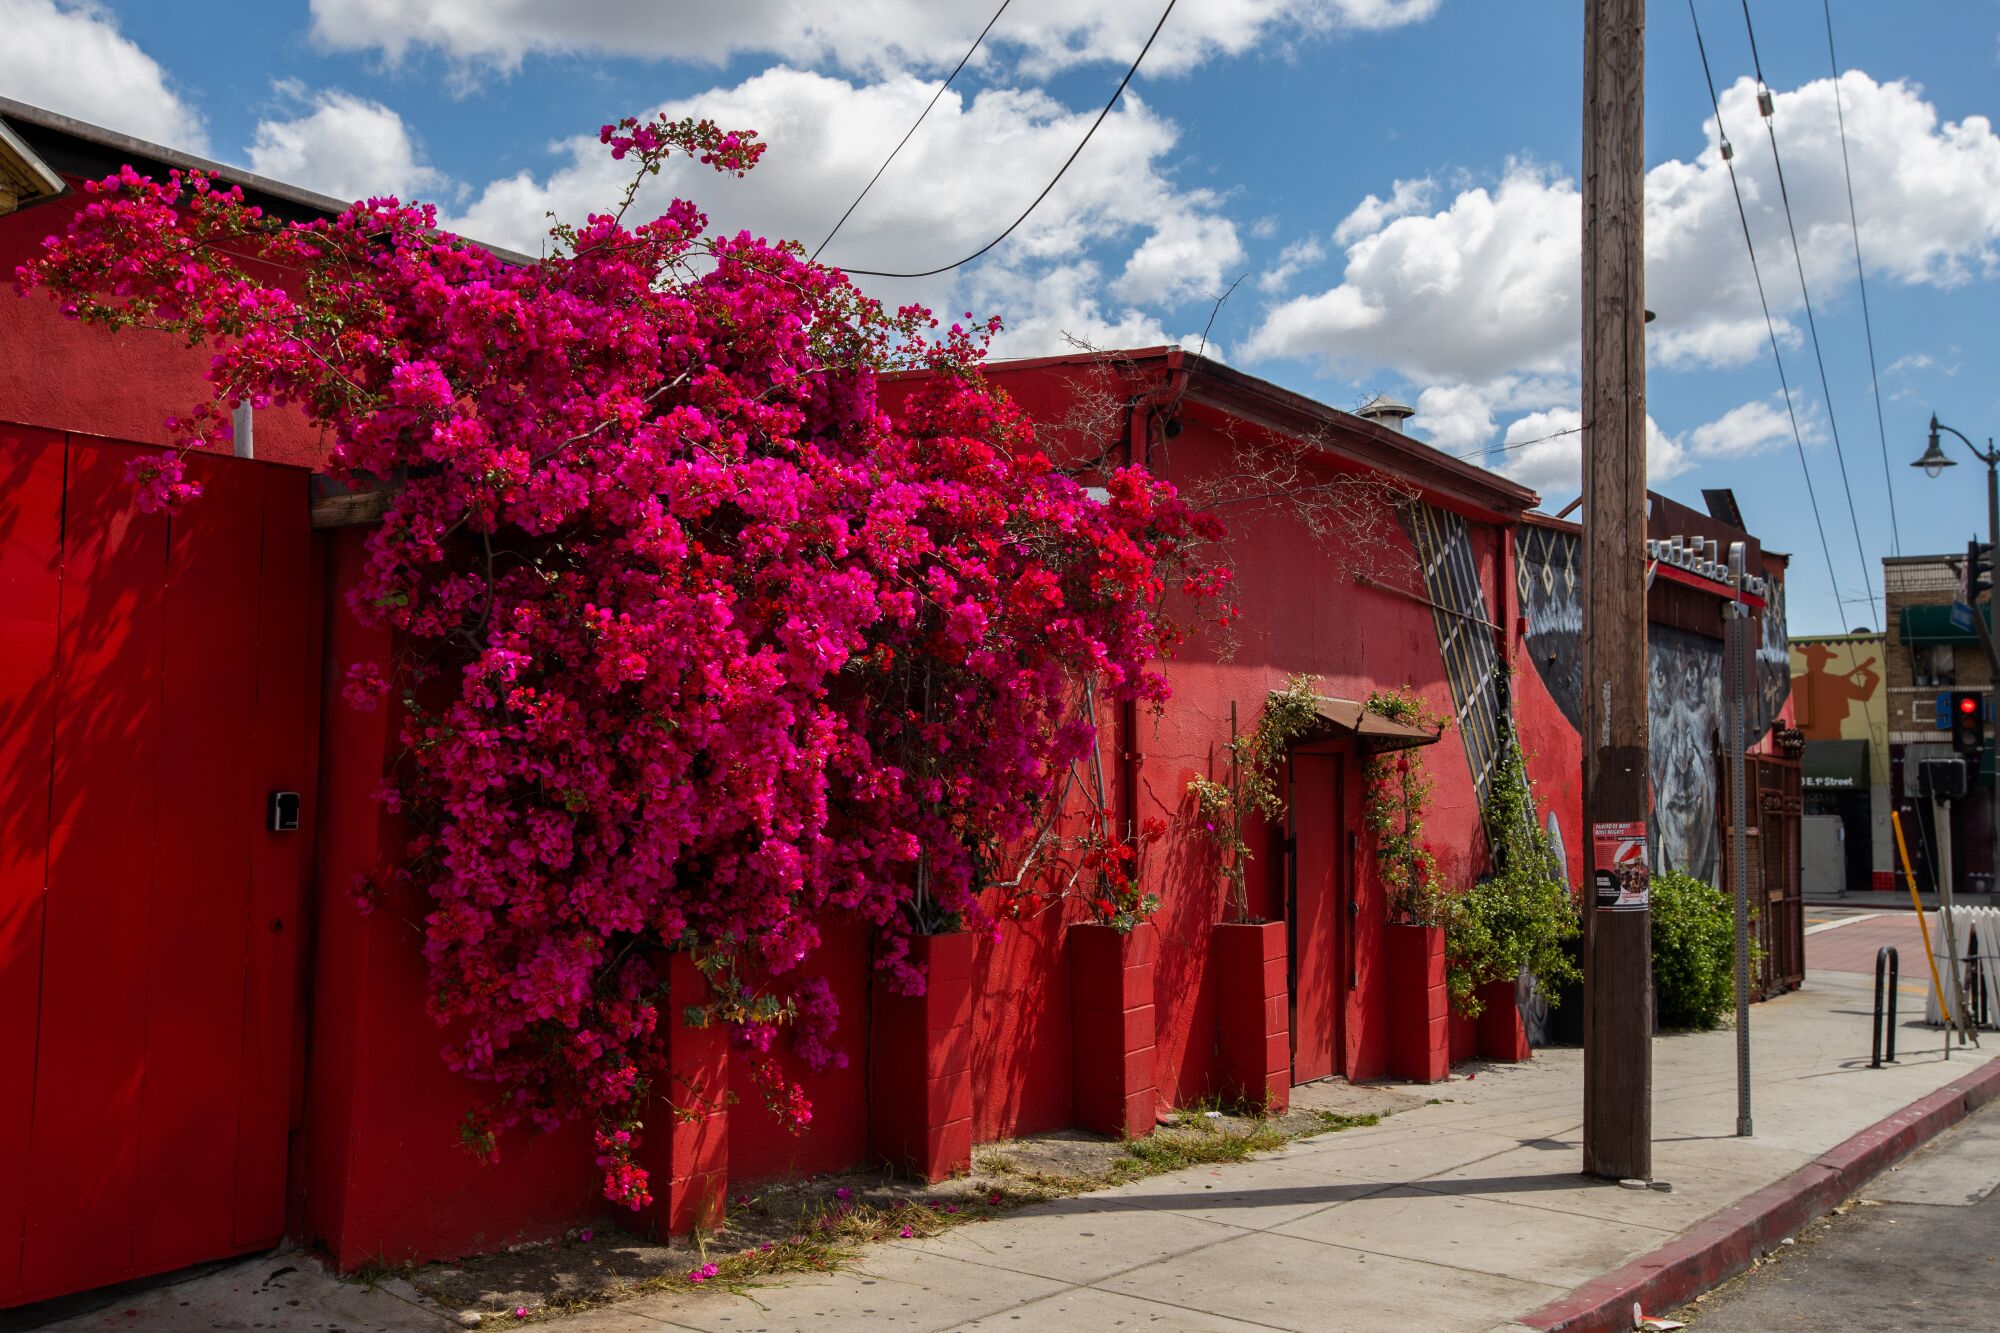 Magenta bougainvillea clusters hang down a red wall 